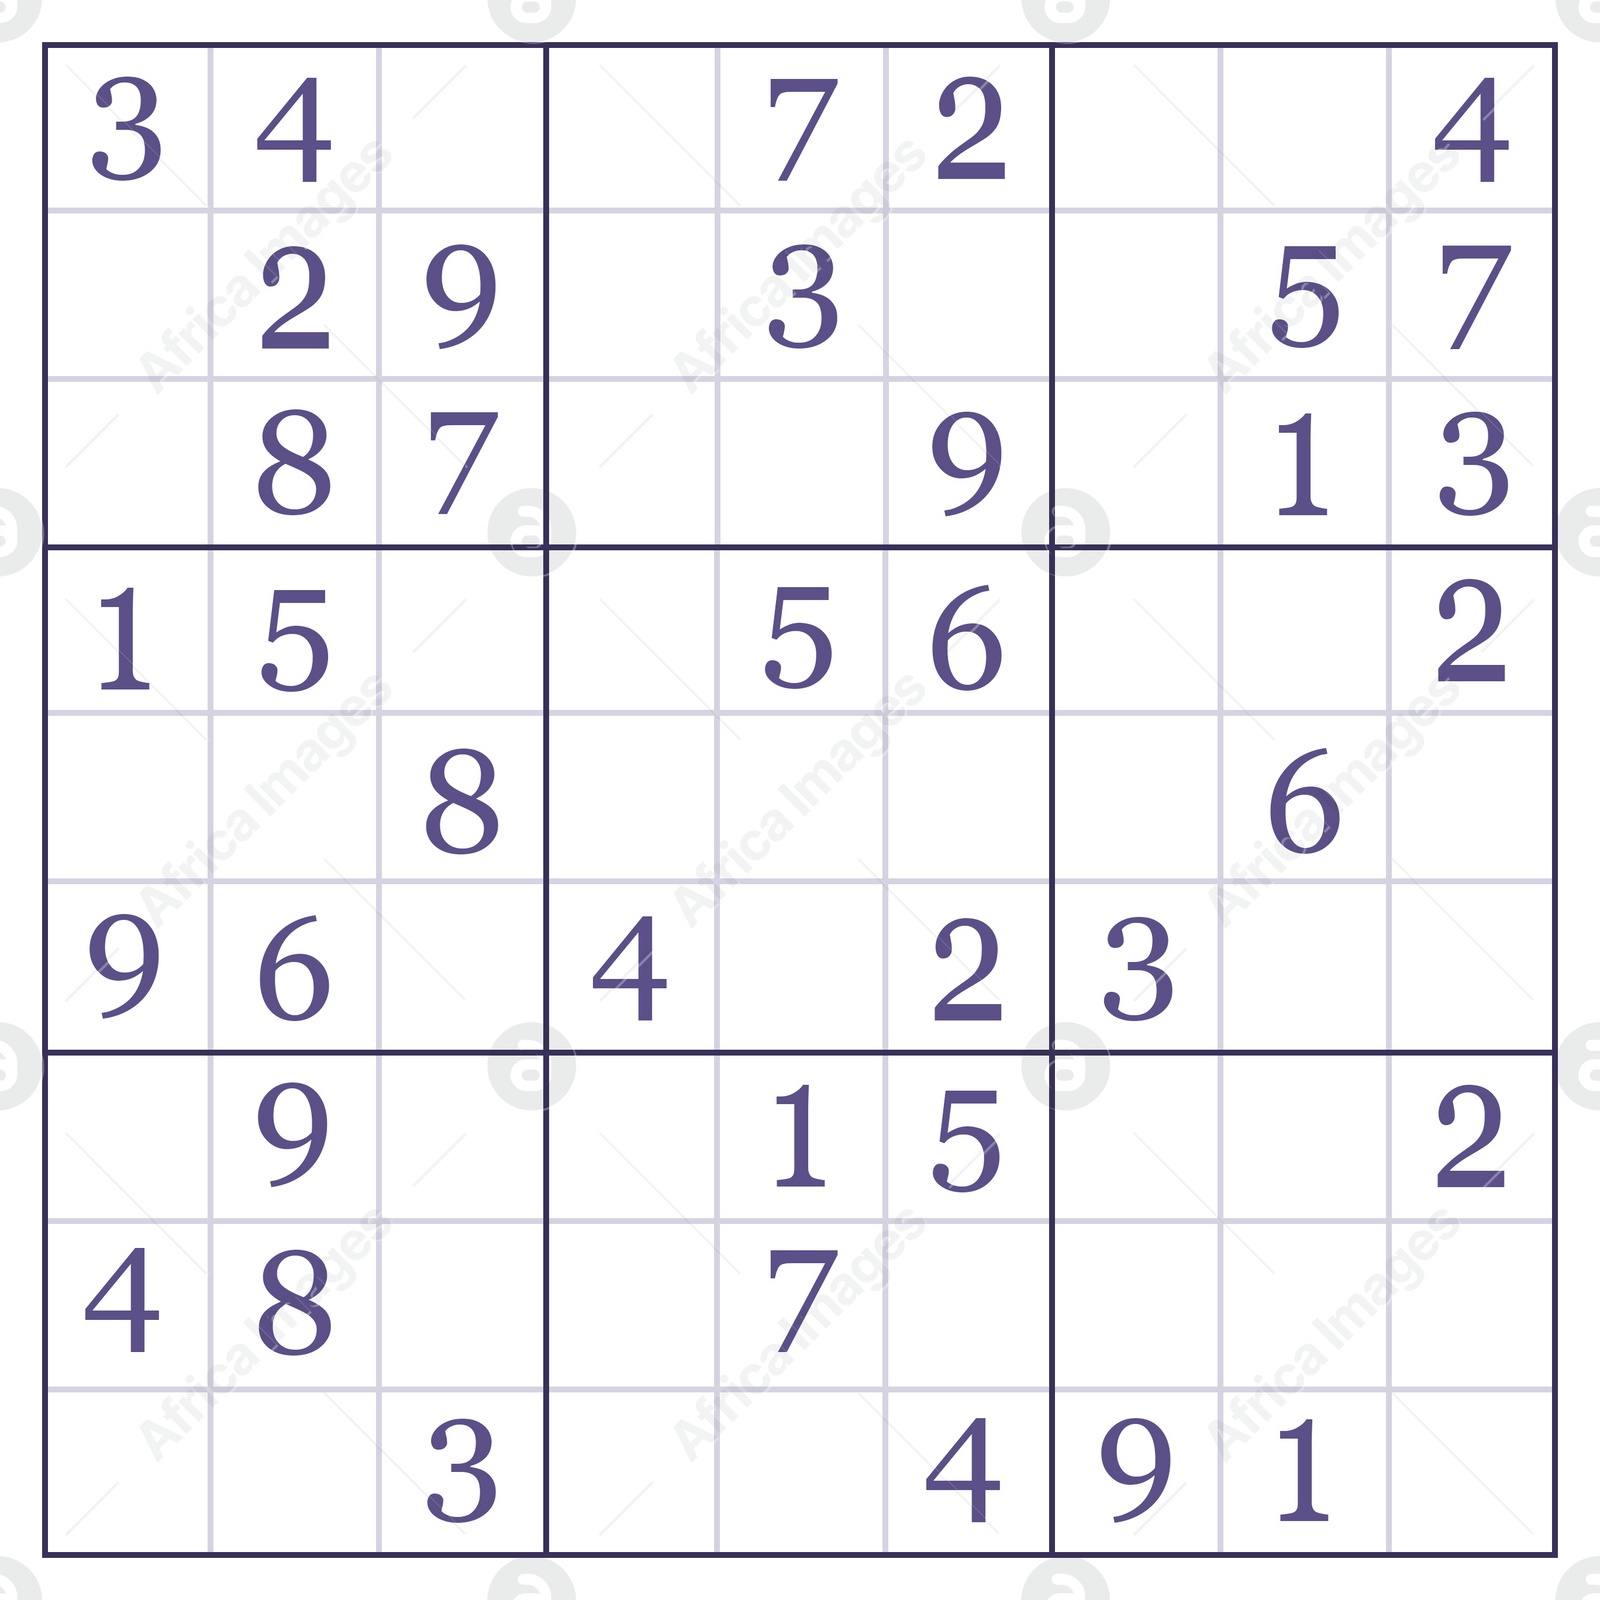 Illustration of Classic Sudoku. Grids with numbers on white background, illustration